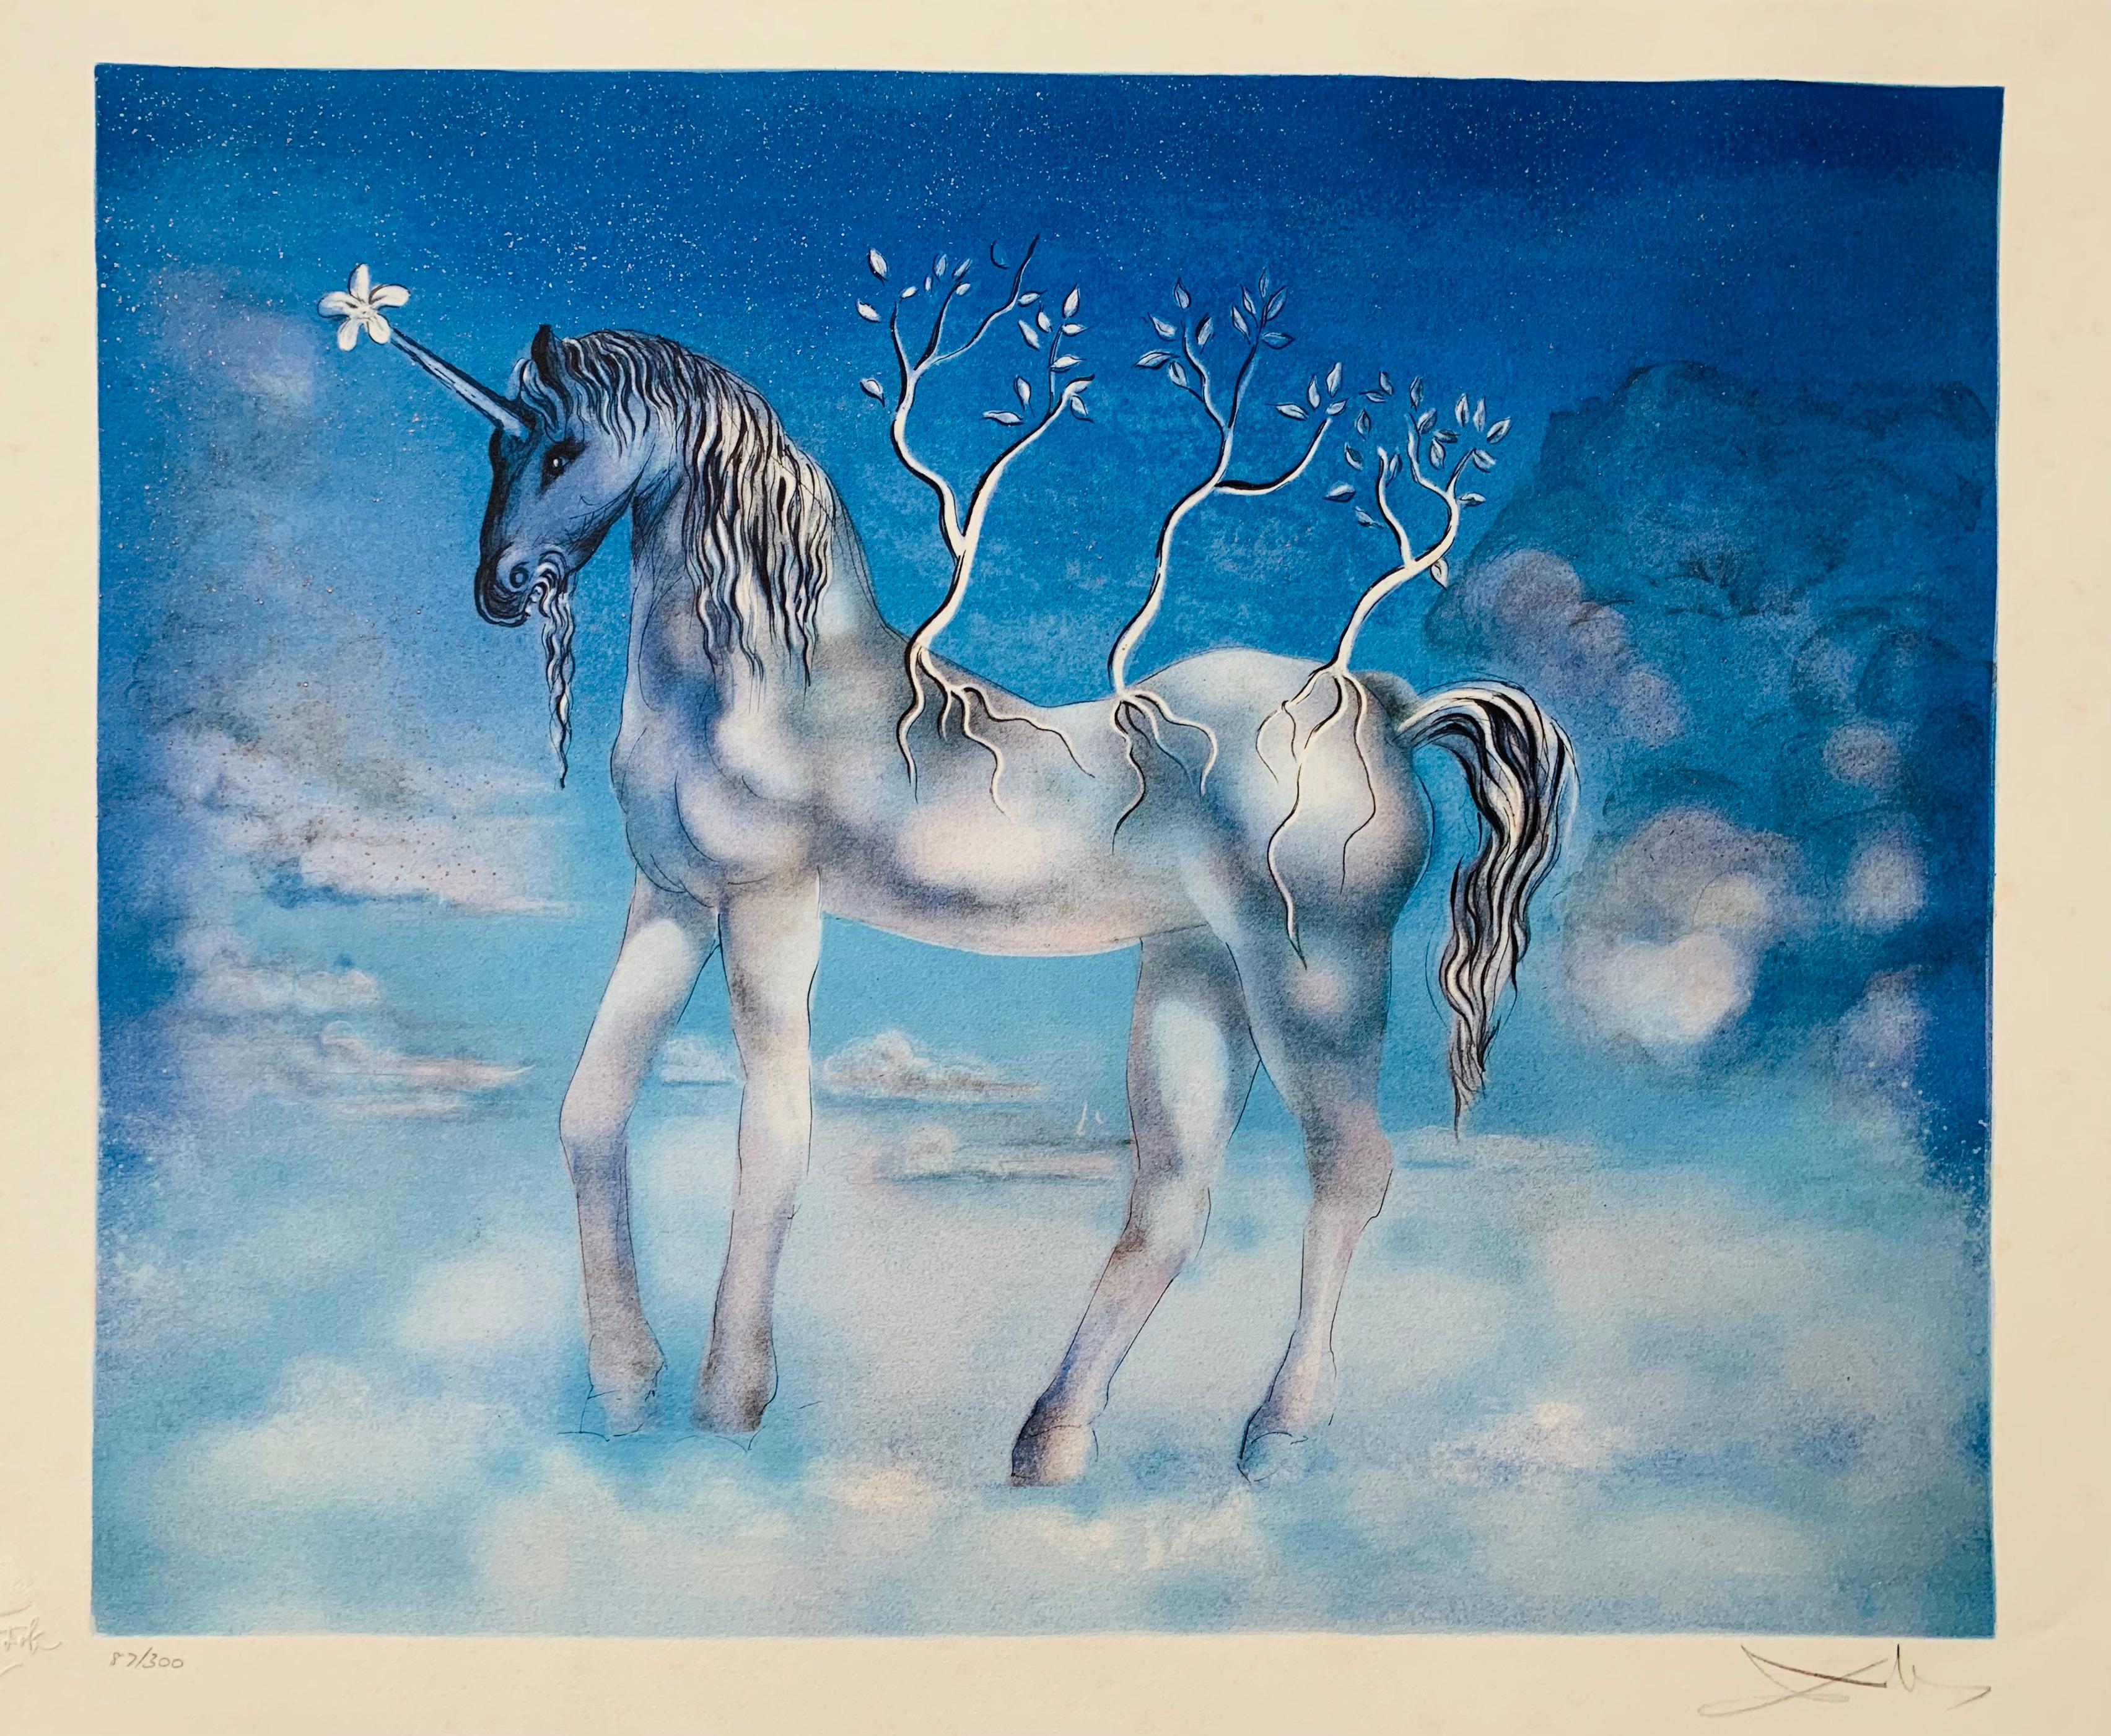 An original hand signed large lithograph of 